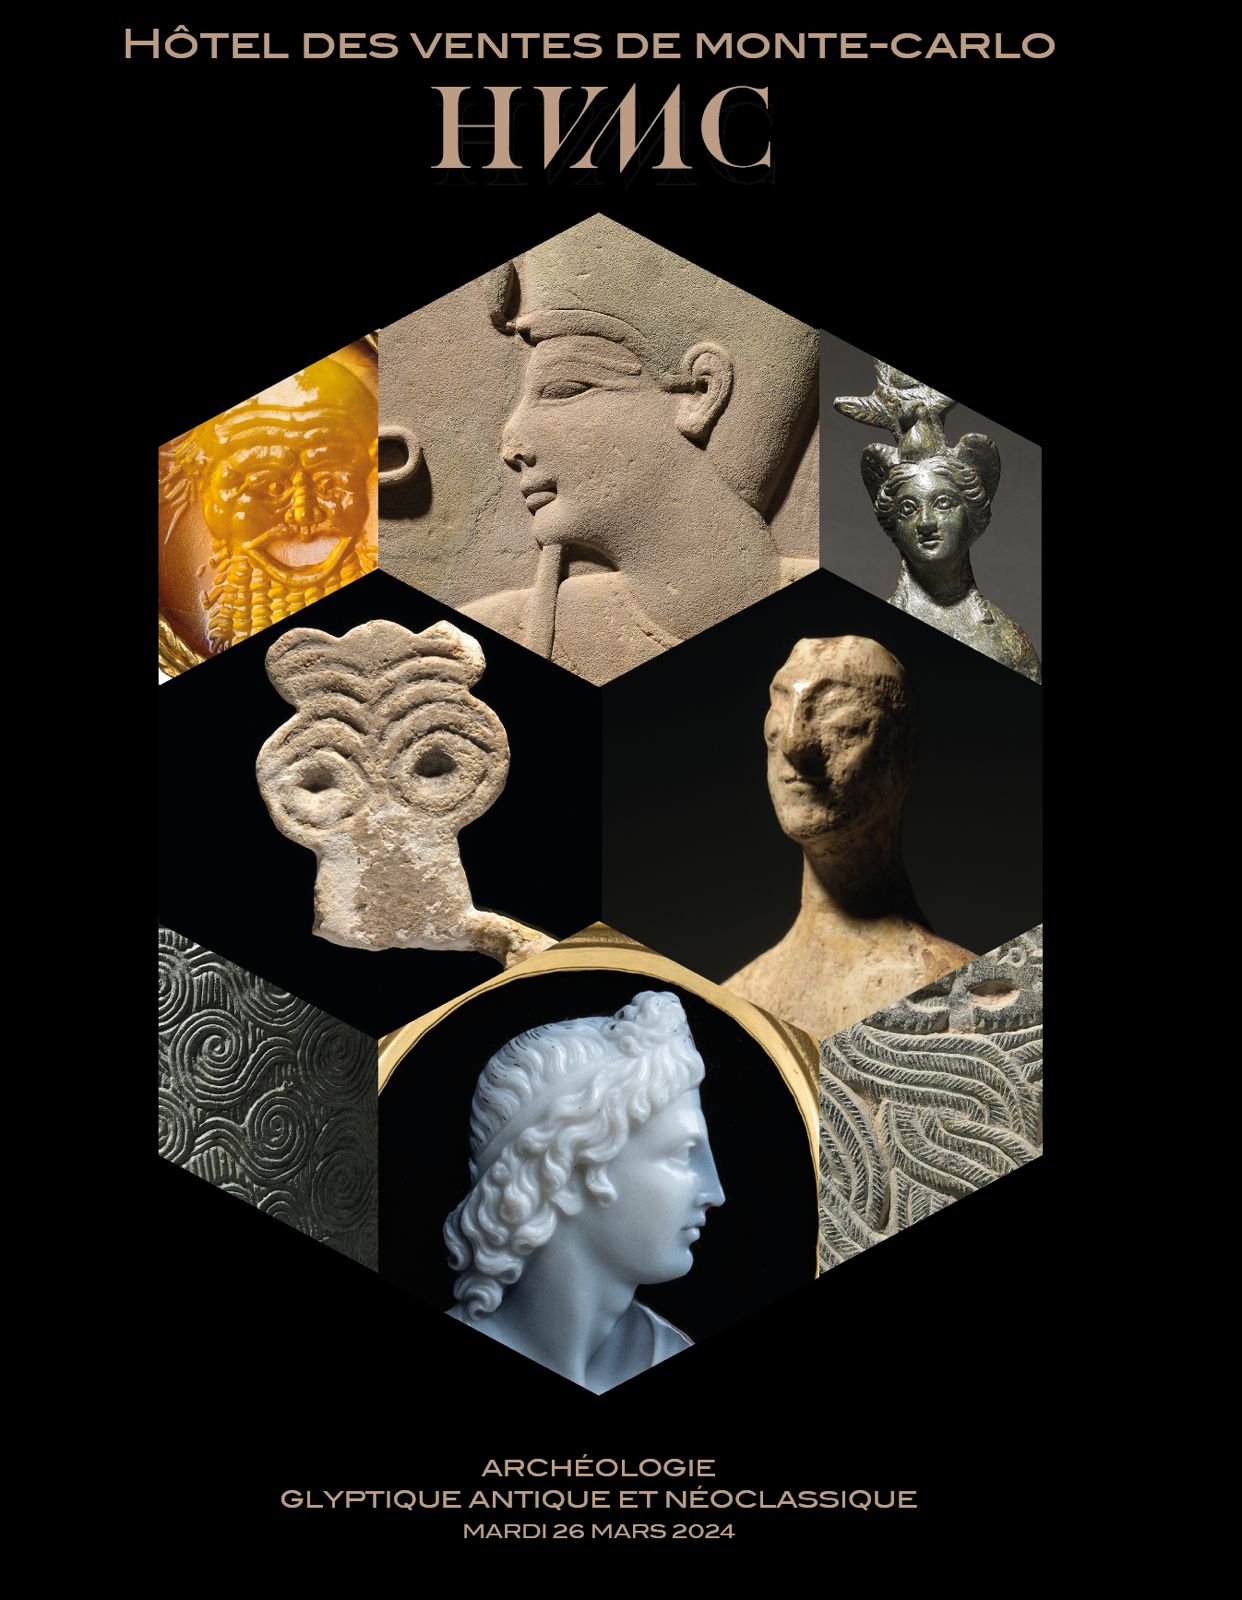 Archaeology, Ancient and Neoclassical Glyptics